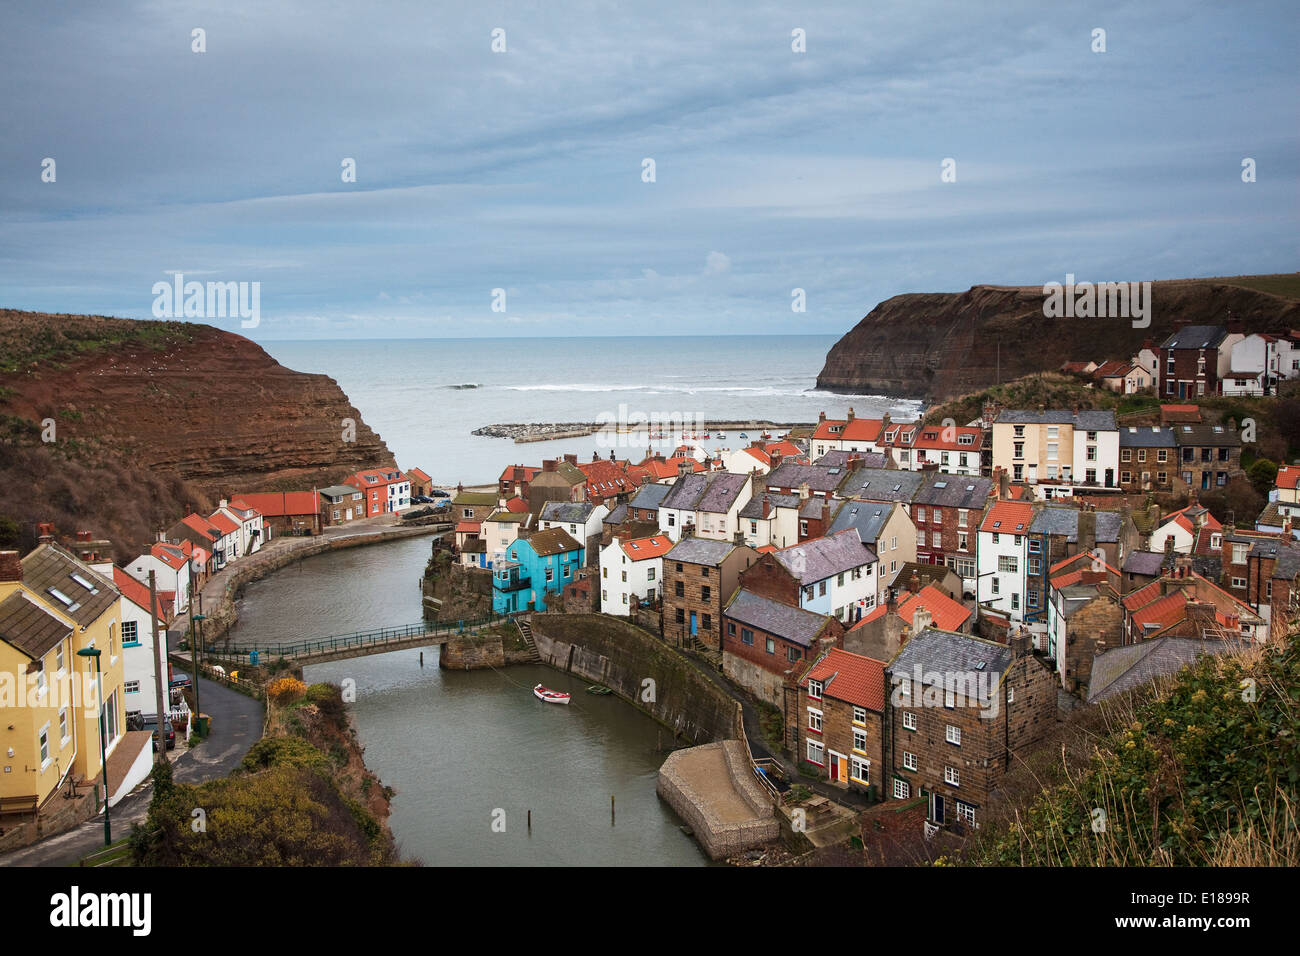 Village and bay, Staithes, Yorkshire, United Kingdom Stock Photo